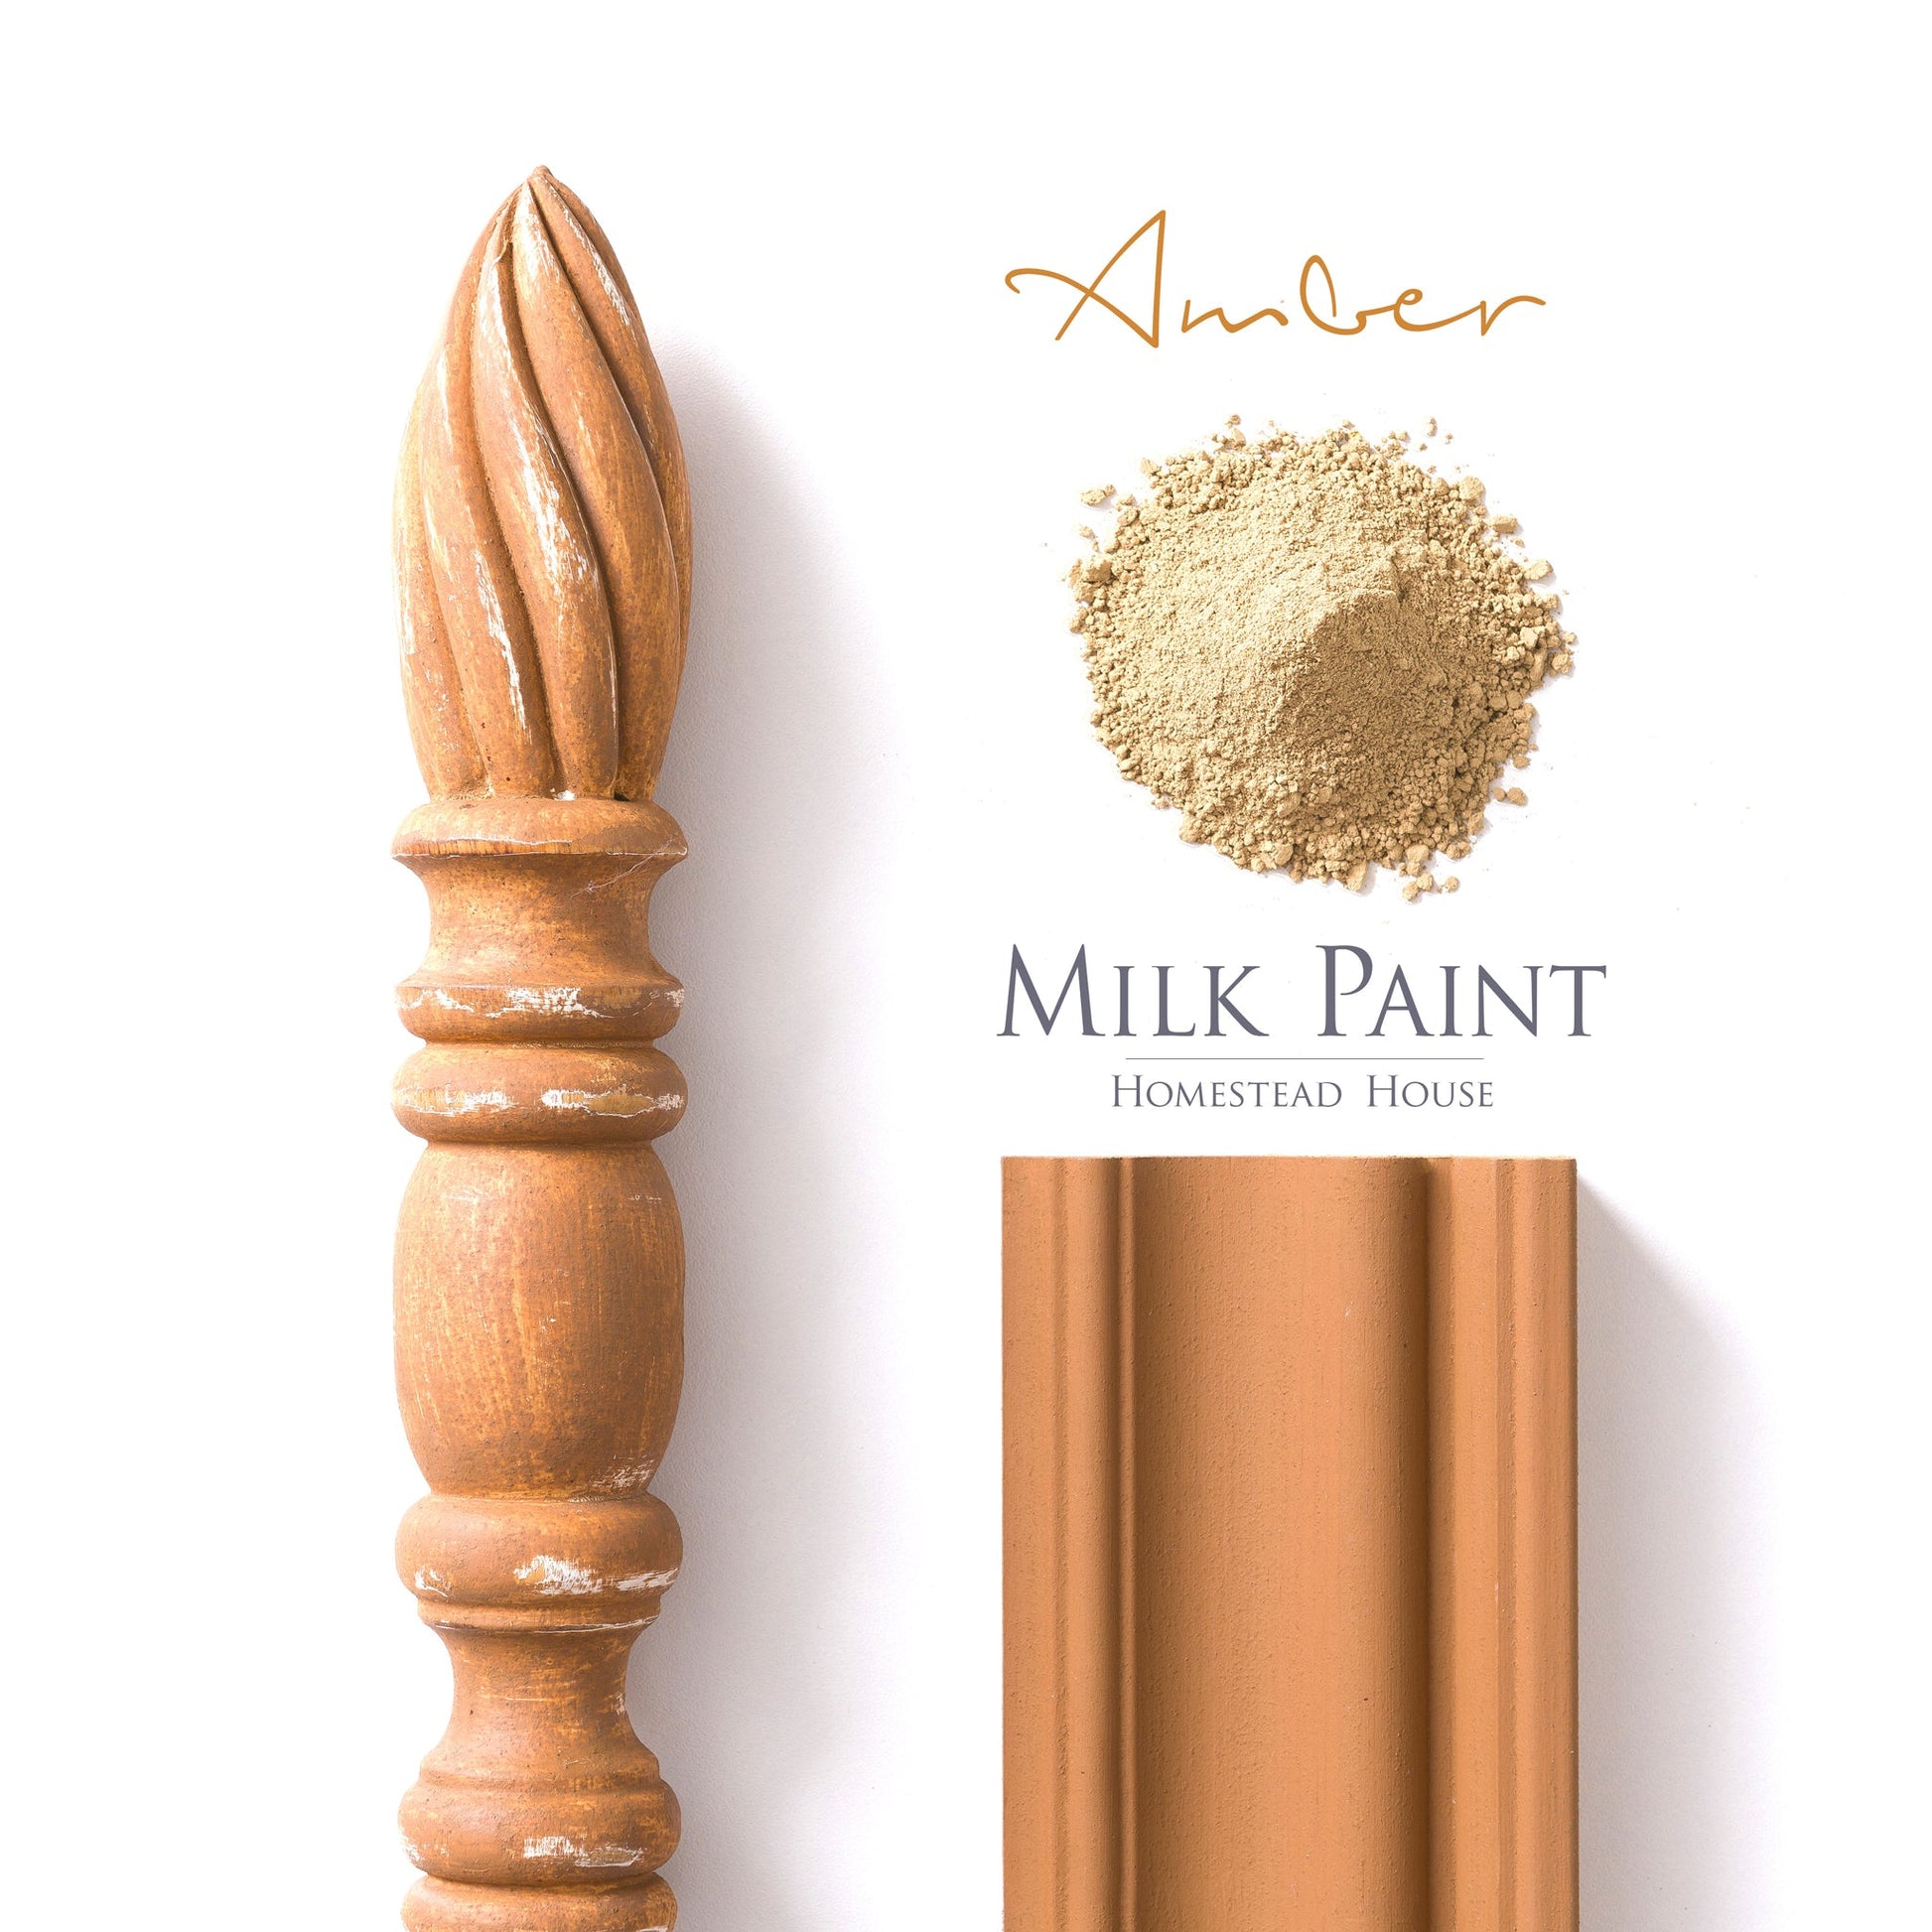 Milk Paint from Homestead House in Amber, A dark honey yellow with a shade of burnt orange. | homesteadhouse.ca